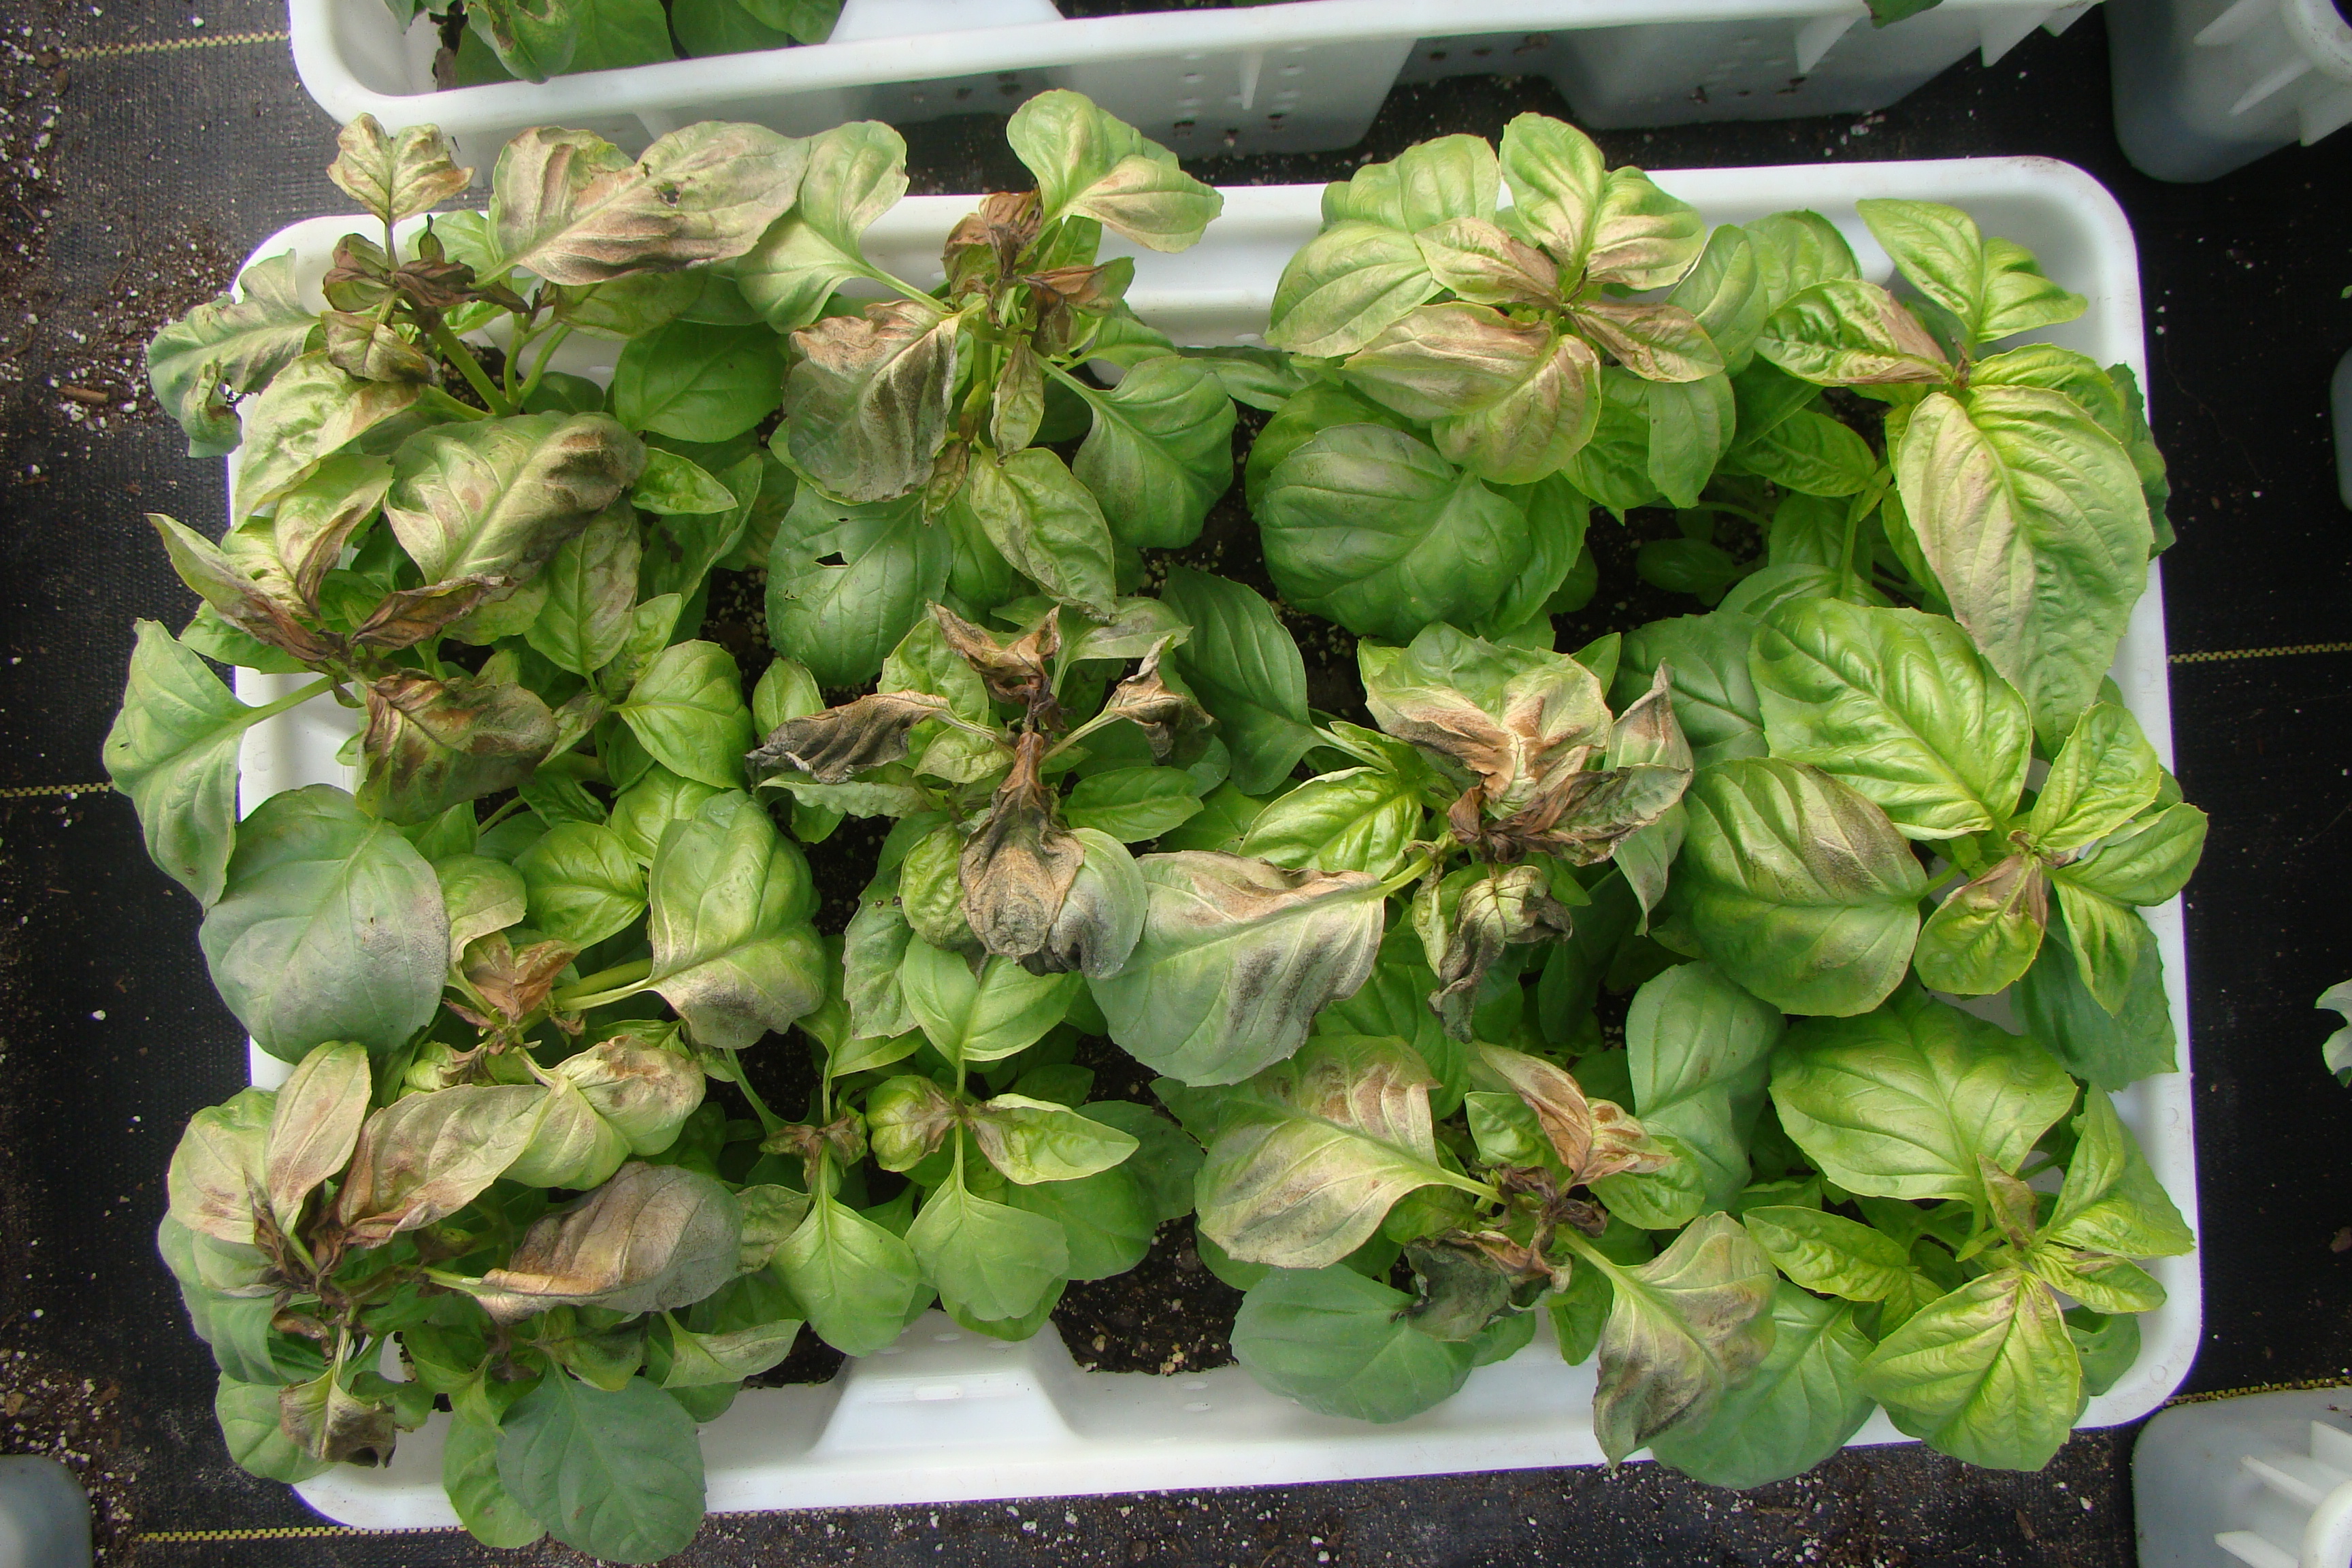 Basil crop with chilling injury